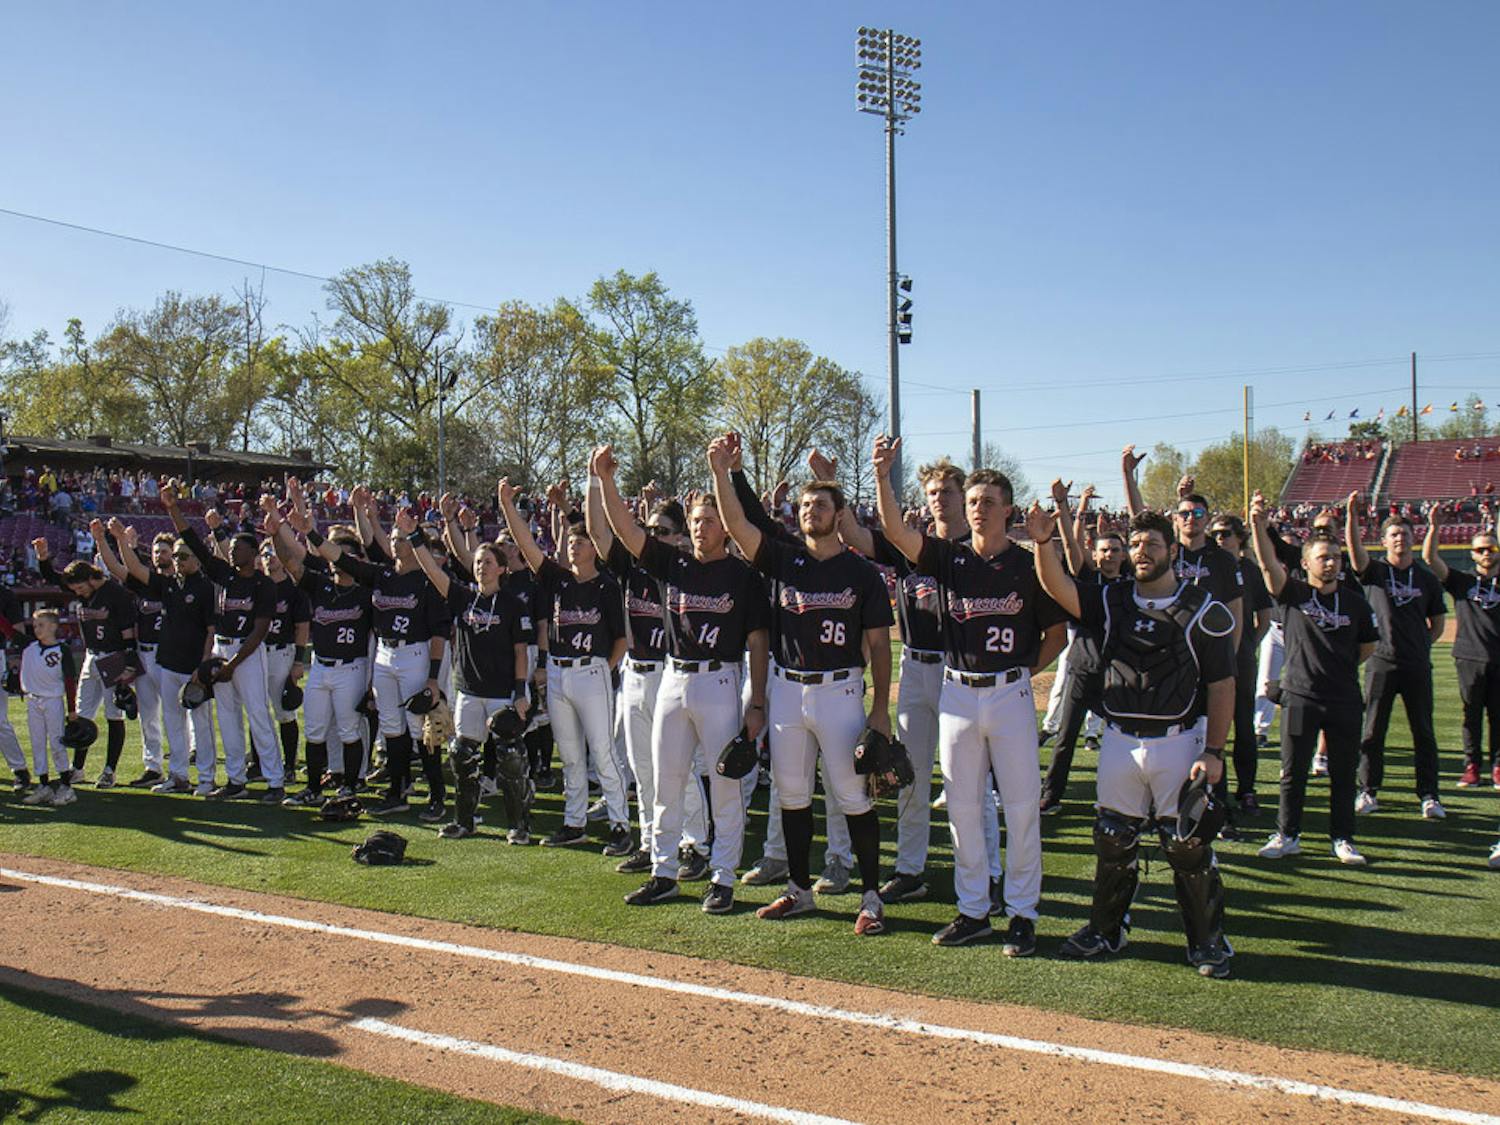 South Carolina players offer a toast during the playing of alma mater after their 7-1 win against Clemson on March 5, 2023. The Gamecocks beat the Tigers 2-1 in the series, putting it 11-1 in the season.